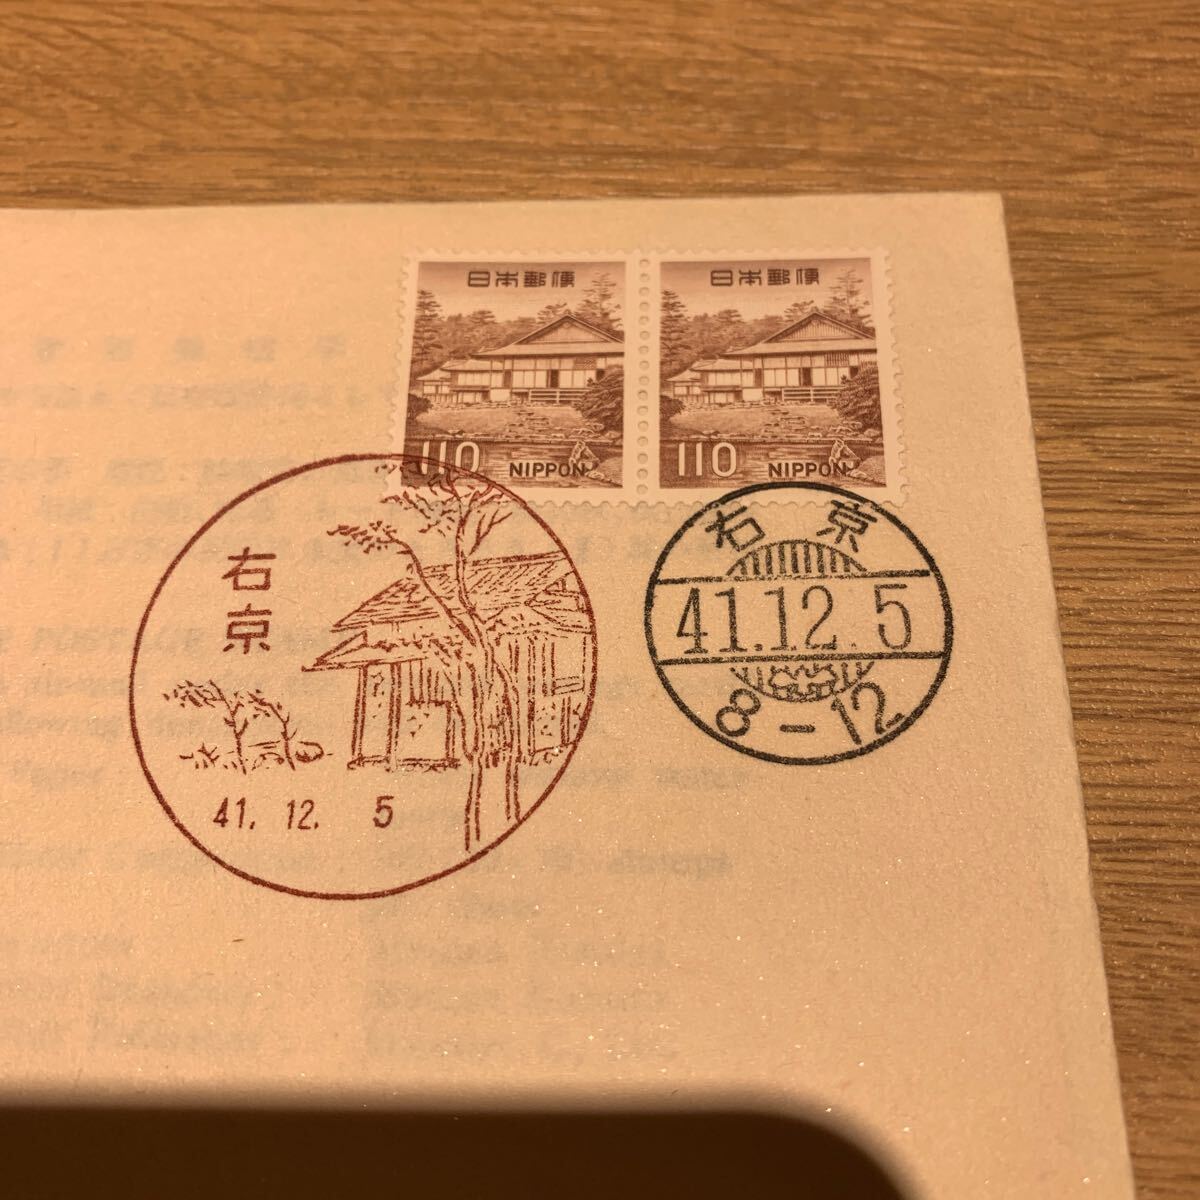  First Day Cover 110 jpy general mail stamp : 110 jpy mail stamp katsura tree .. Showa era 41 year issue 